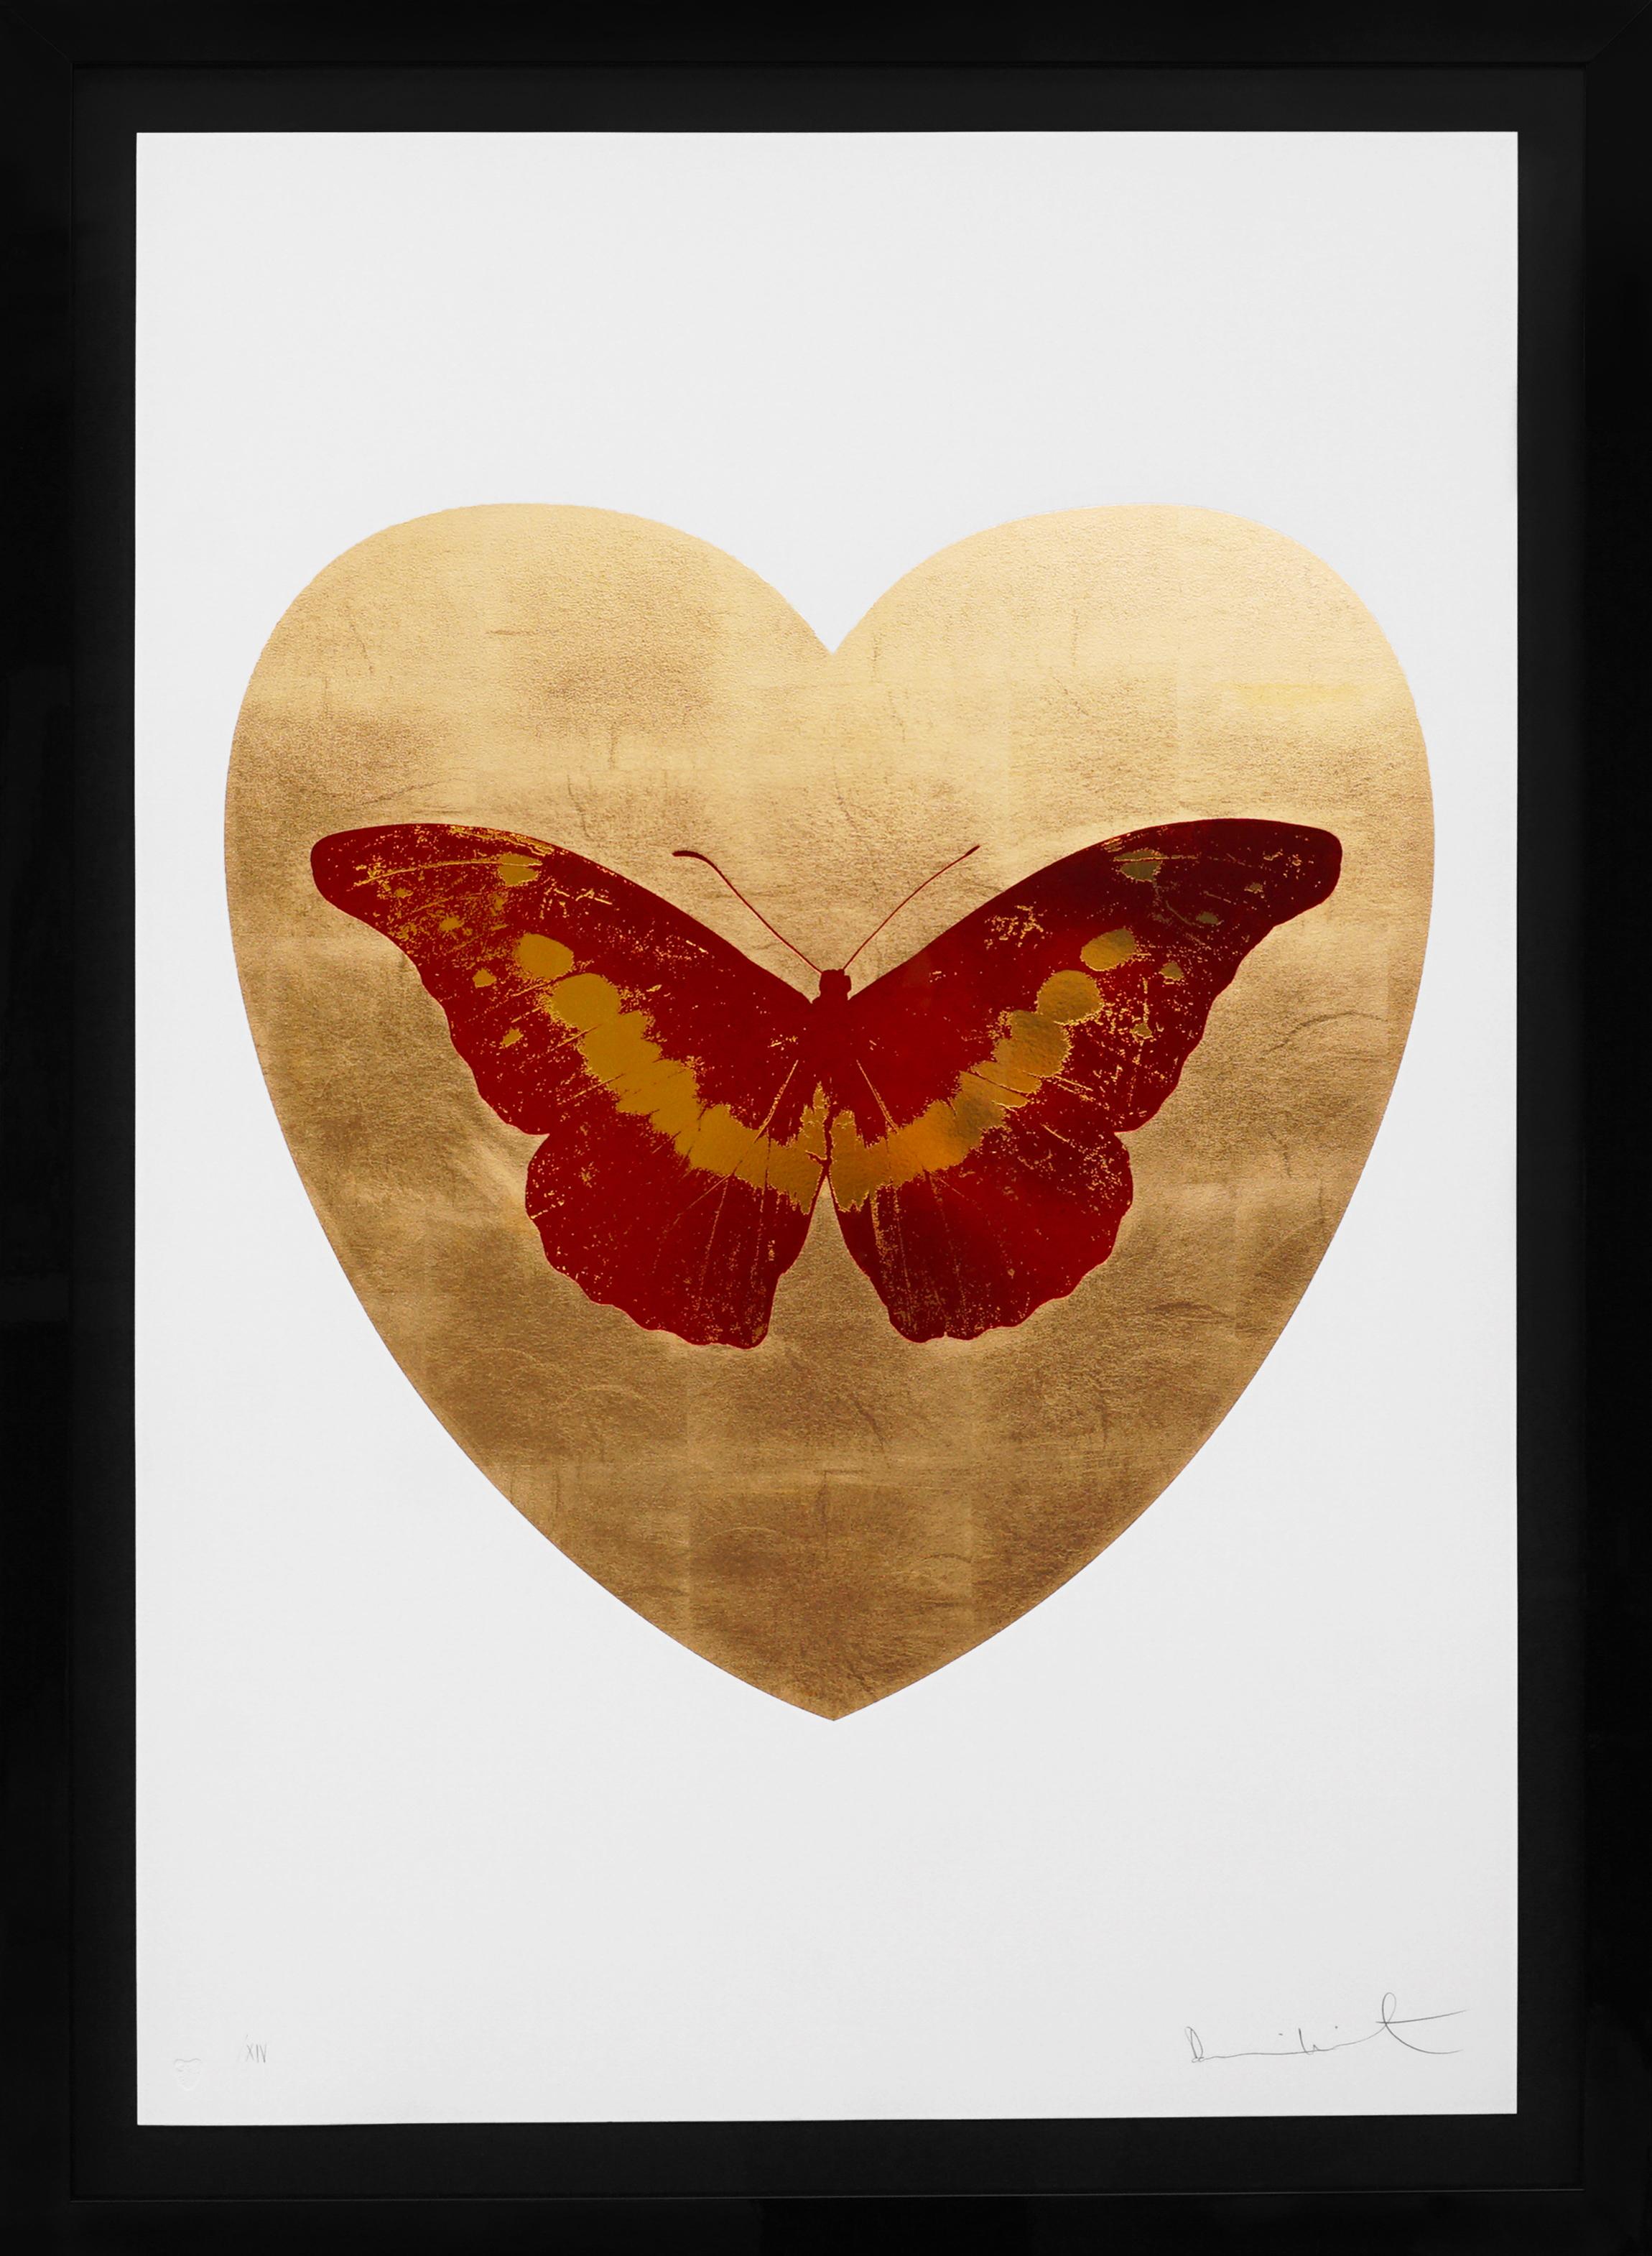 'I Love You' 24K Gold Leaf Heart, Red Butterfly, 2015 - Art by Damien Hirst